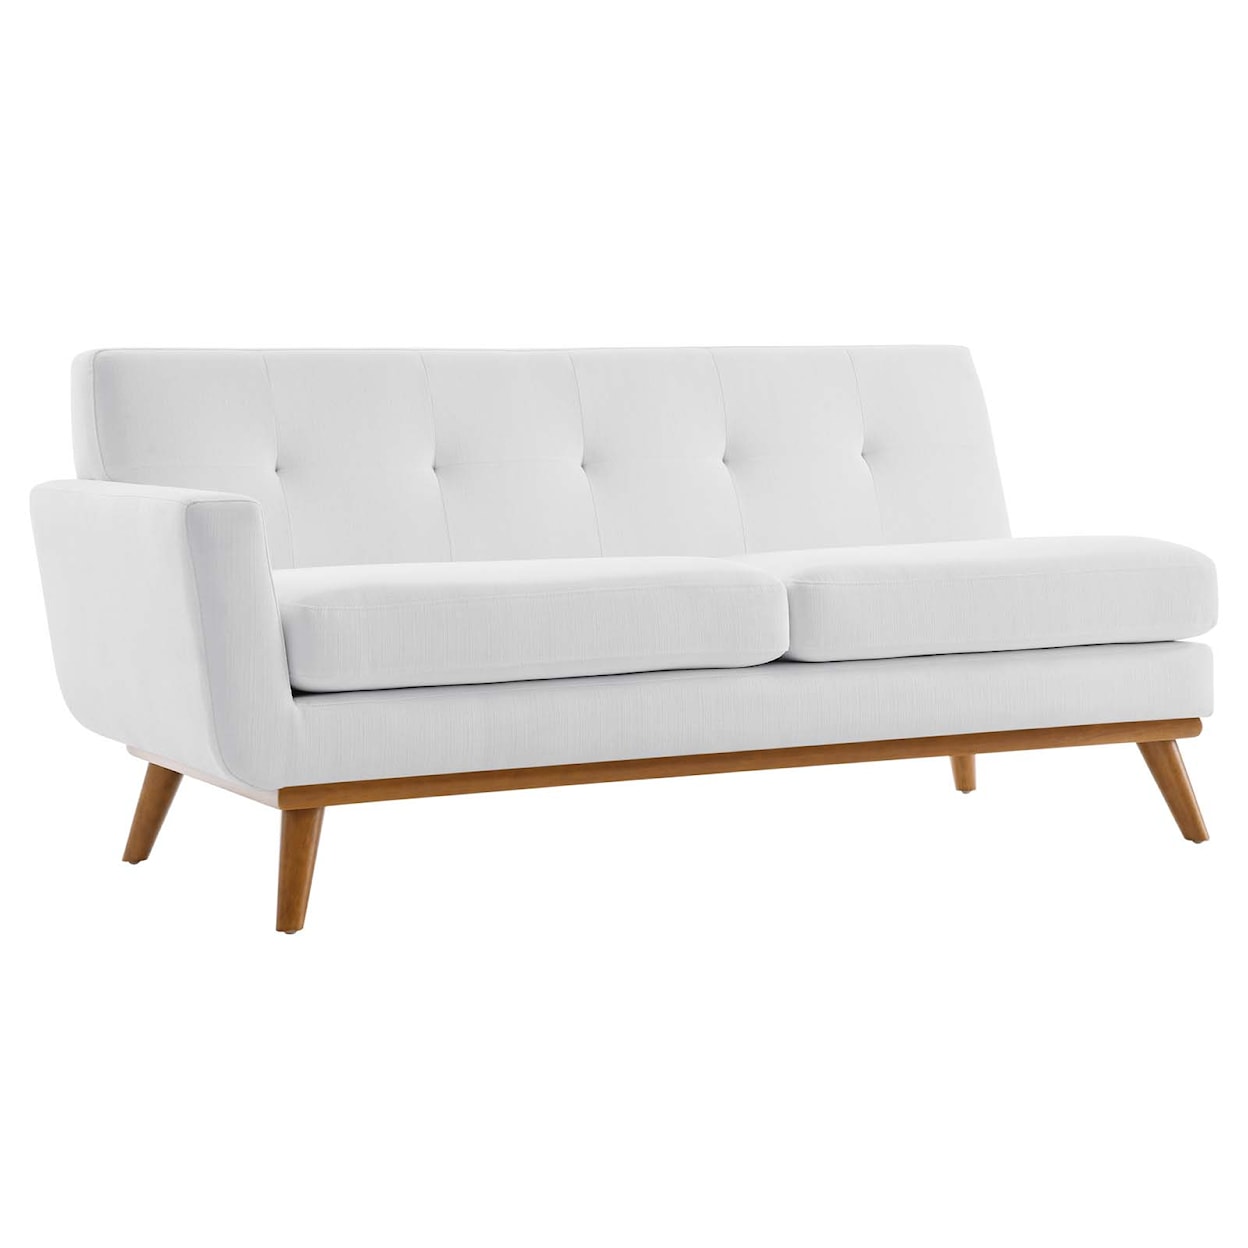 Modway Engage Right-Facing Sectional Sofa